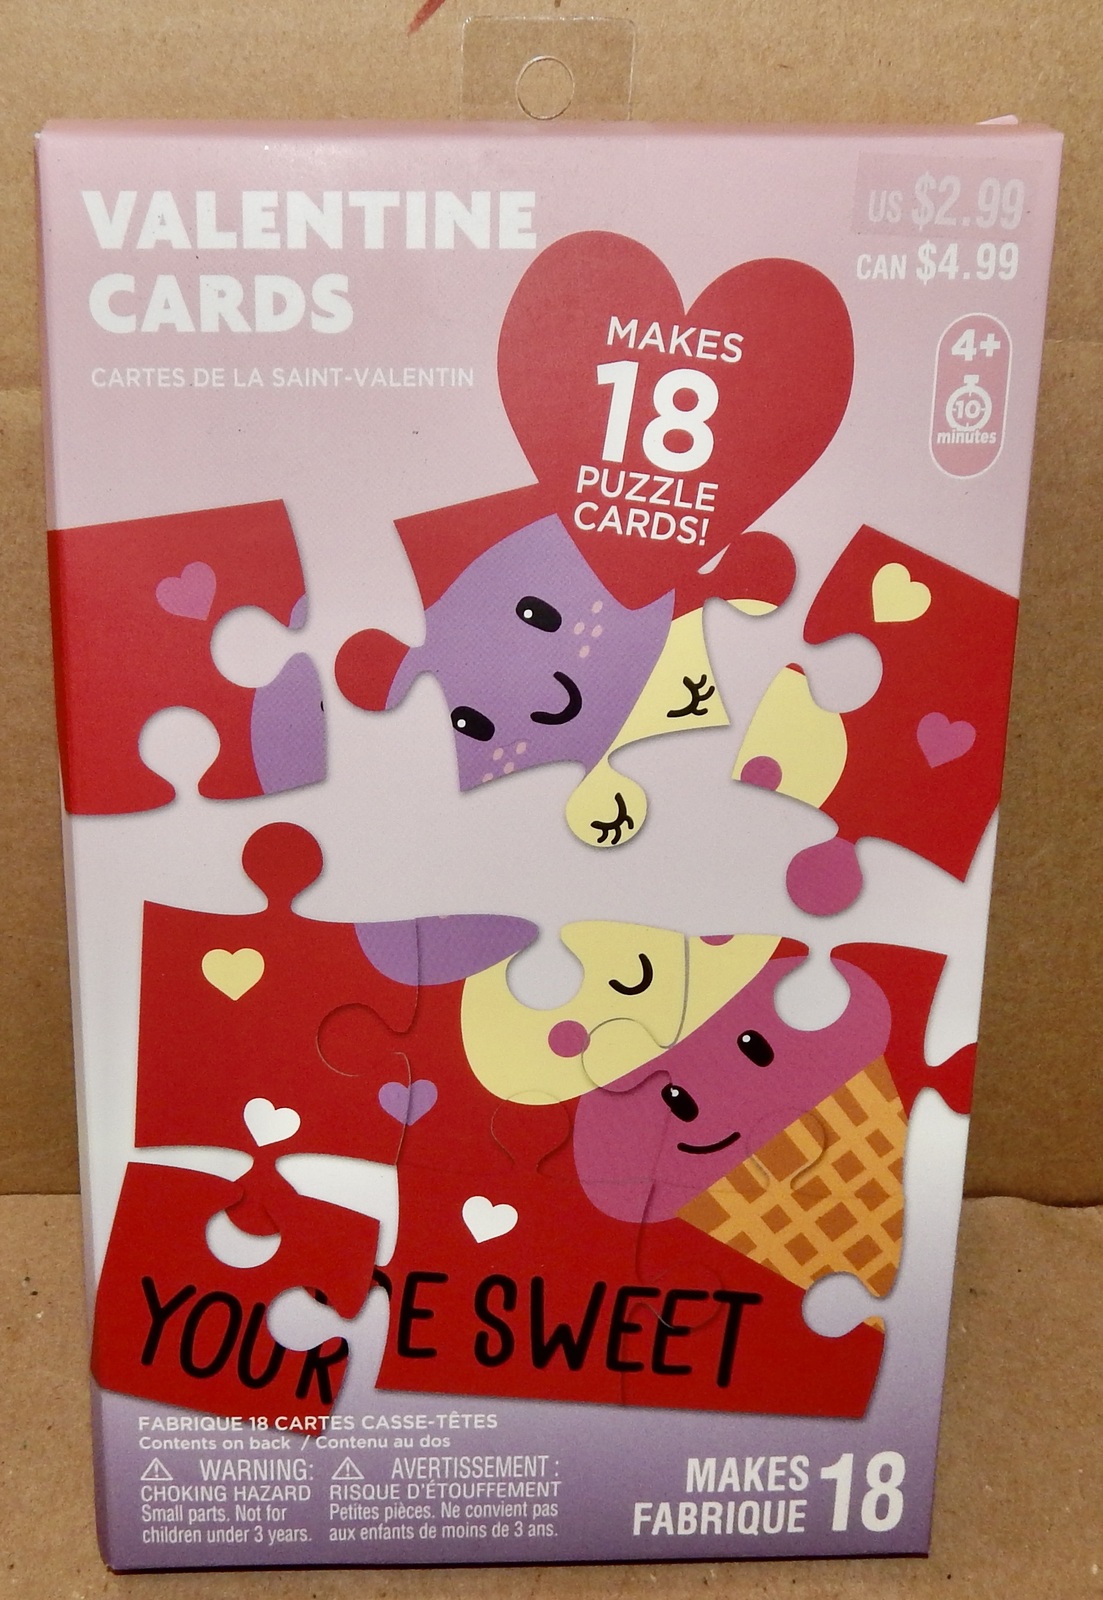 Valentine Cards Makes 18ea Many Types You Choose Puzzles Tattoos Puppets 193E - $2.39